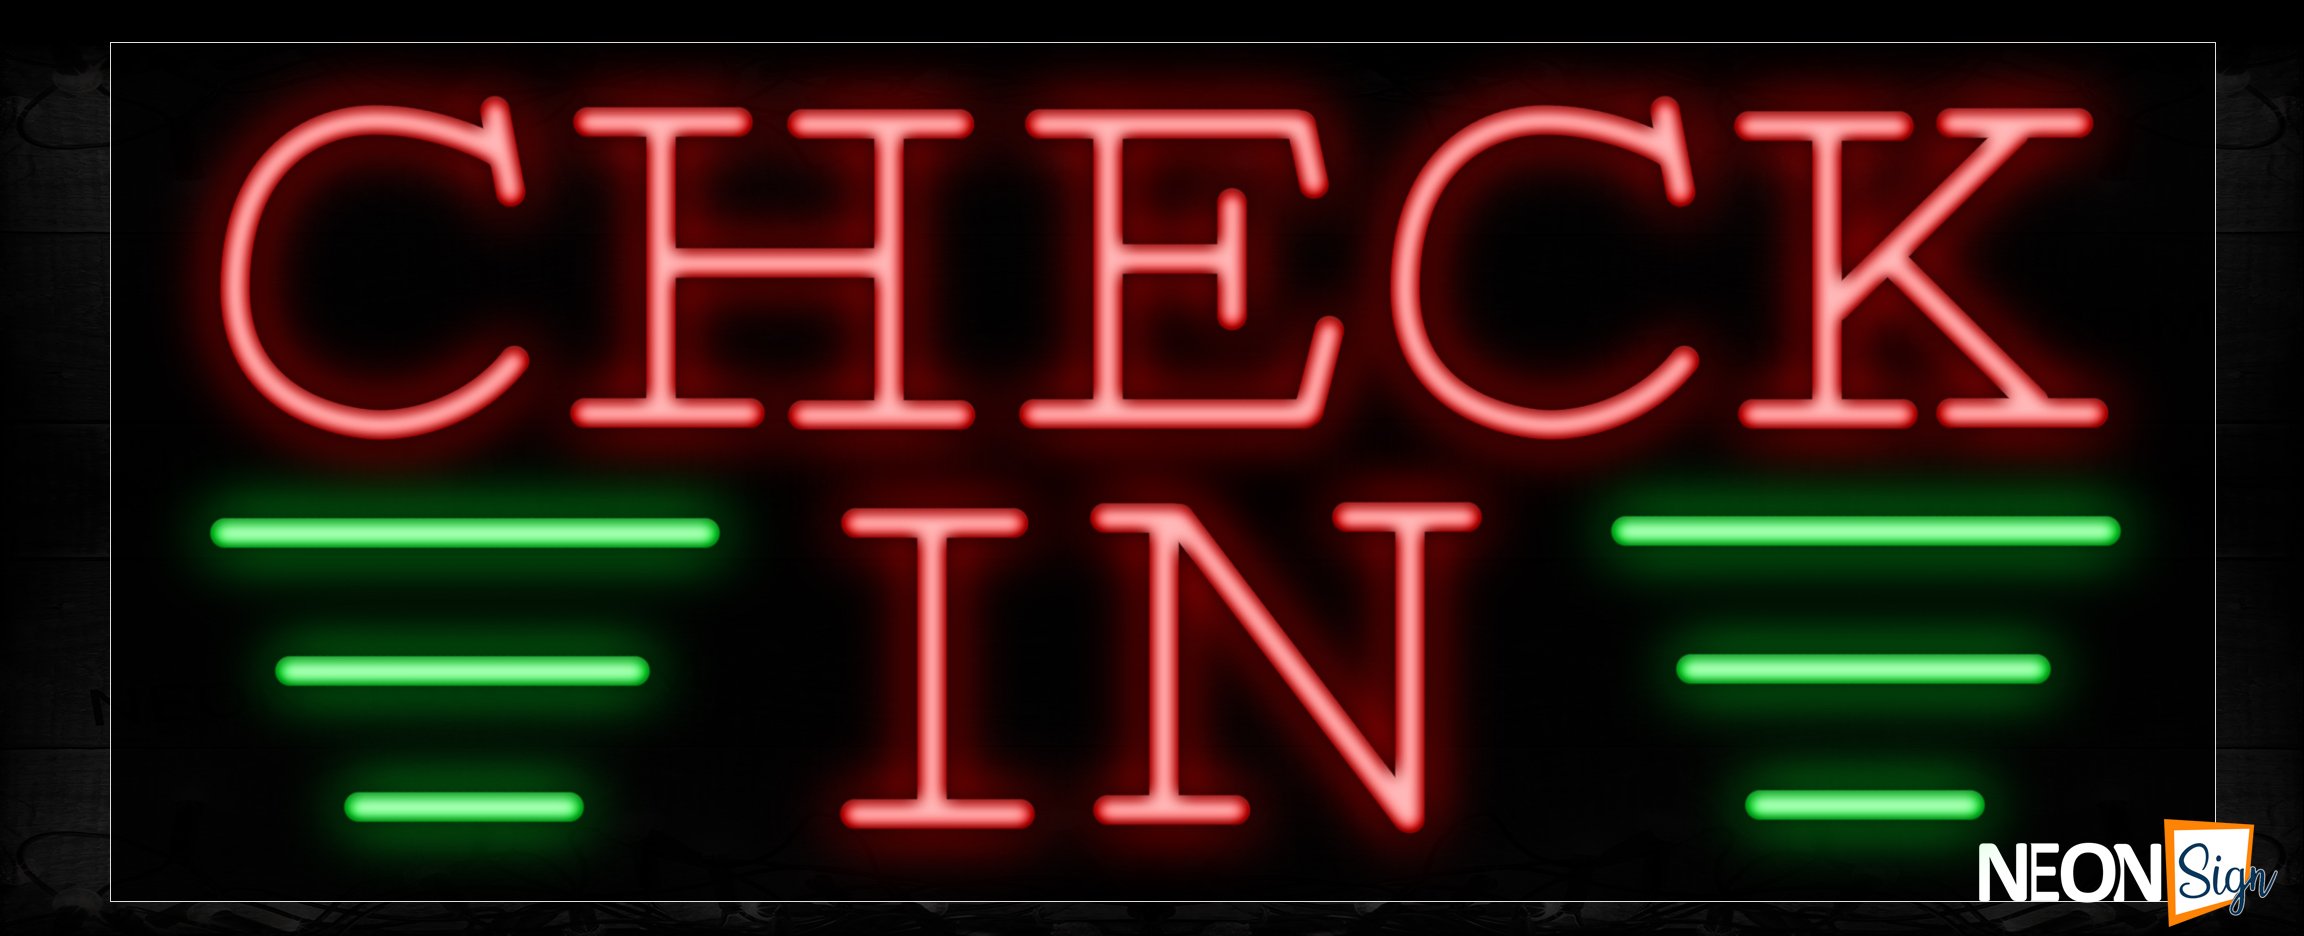 Image of 10764 Check IN with green lines Neon Sign_13x32 Black Backing